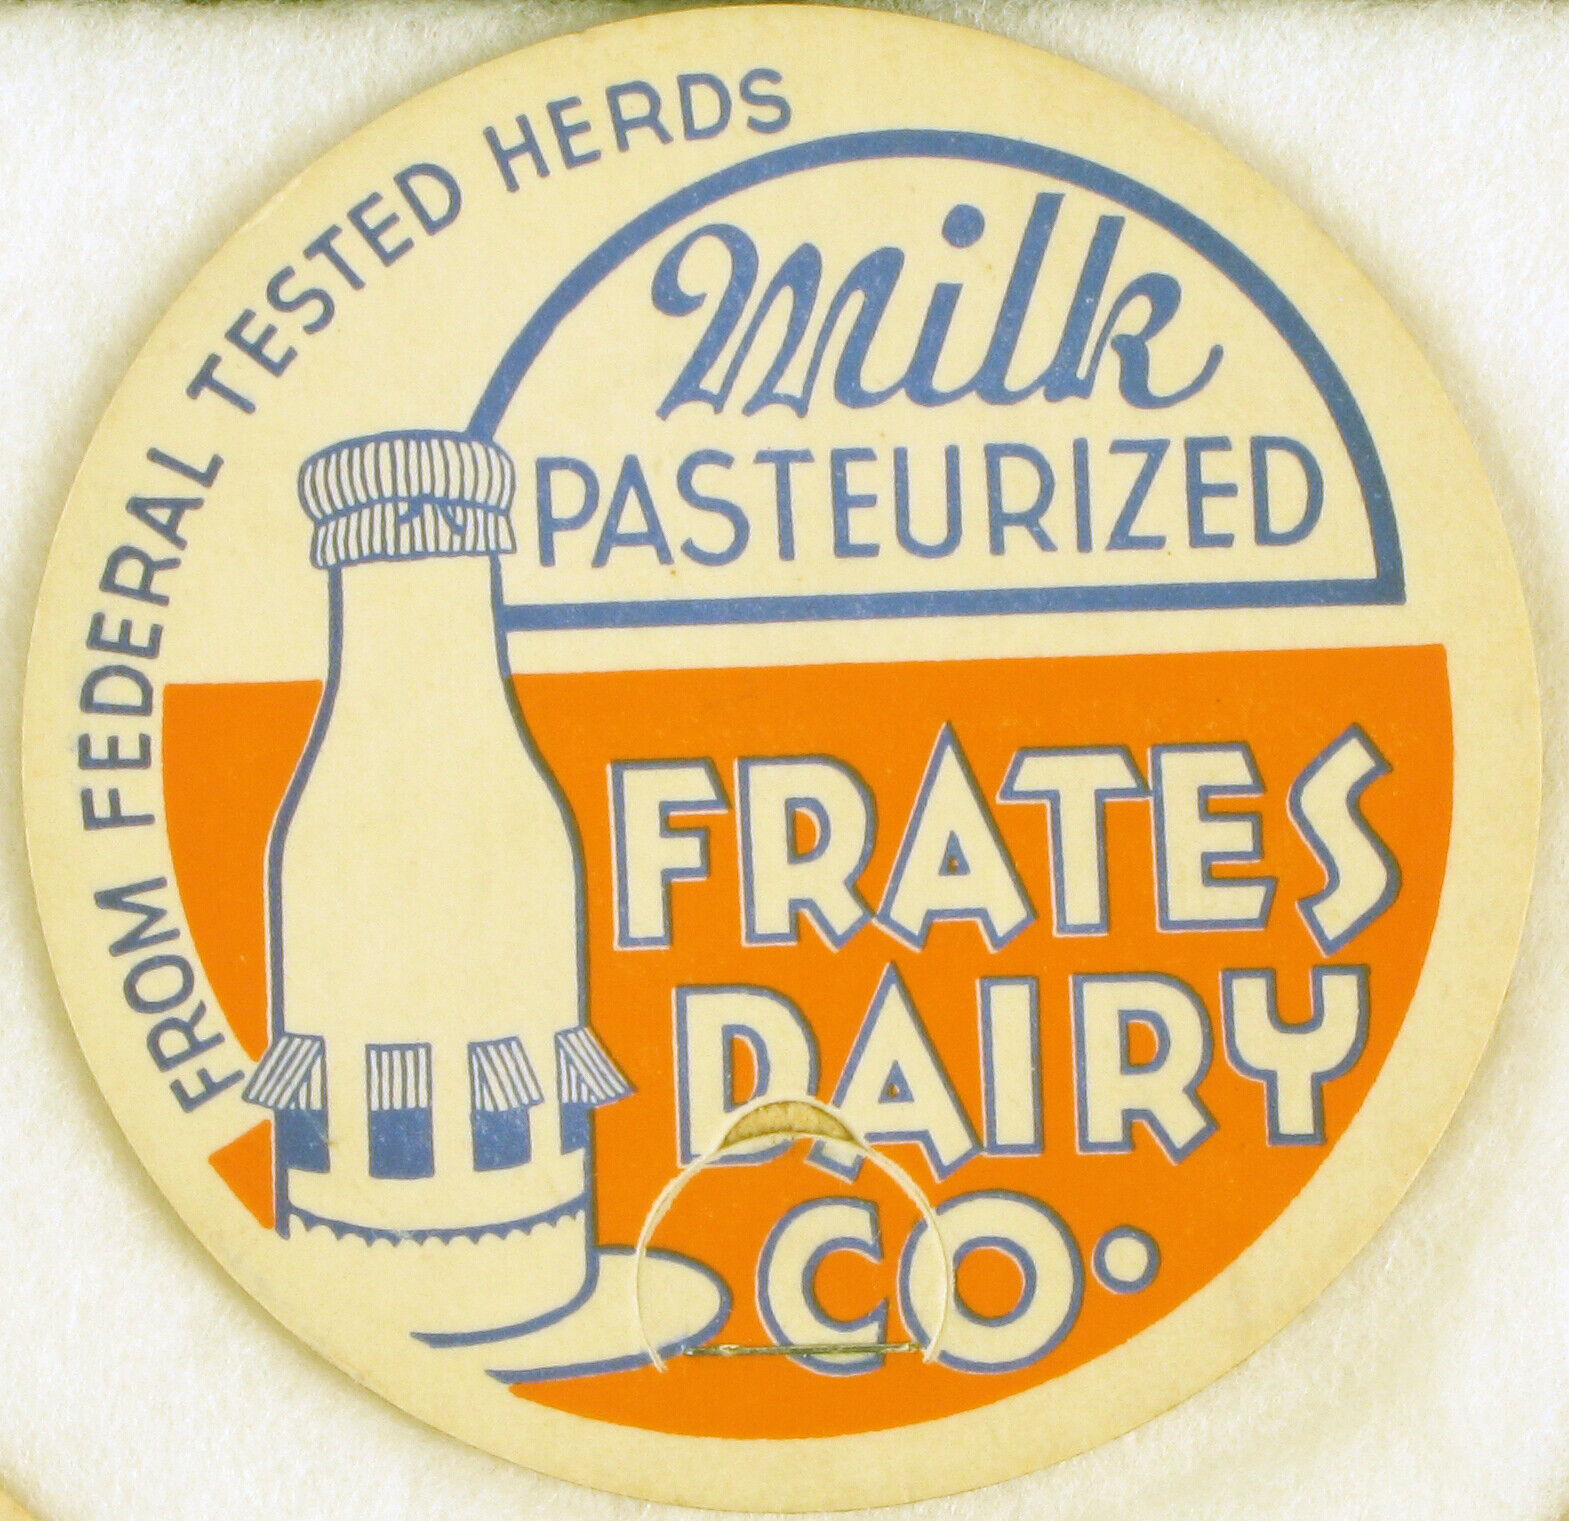 ANTIQUE FRATES DAIRY FARM LARGE MILK BOTTLE CAP ADVERTISING FEDERAL TESTED HERDS